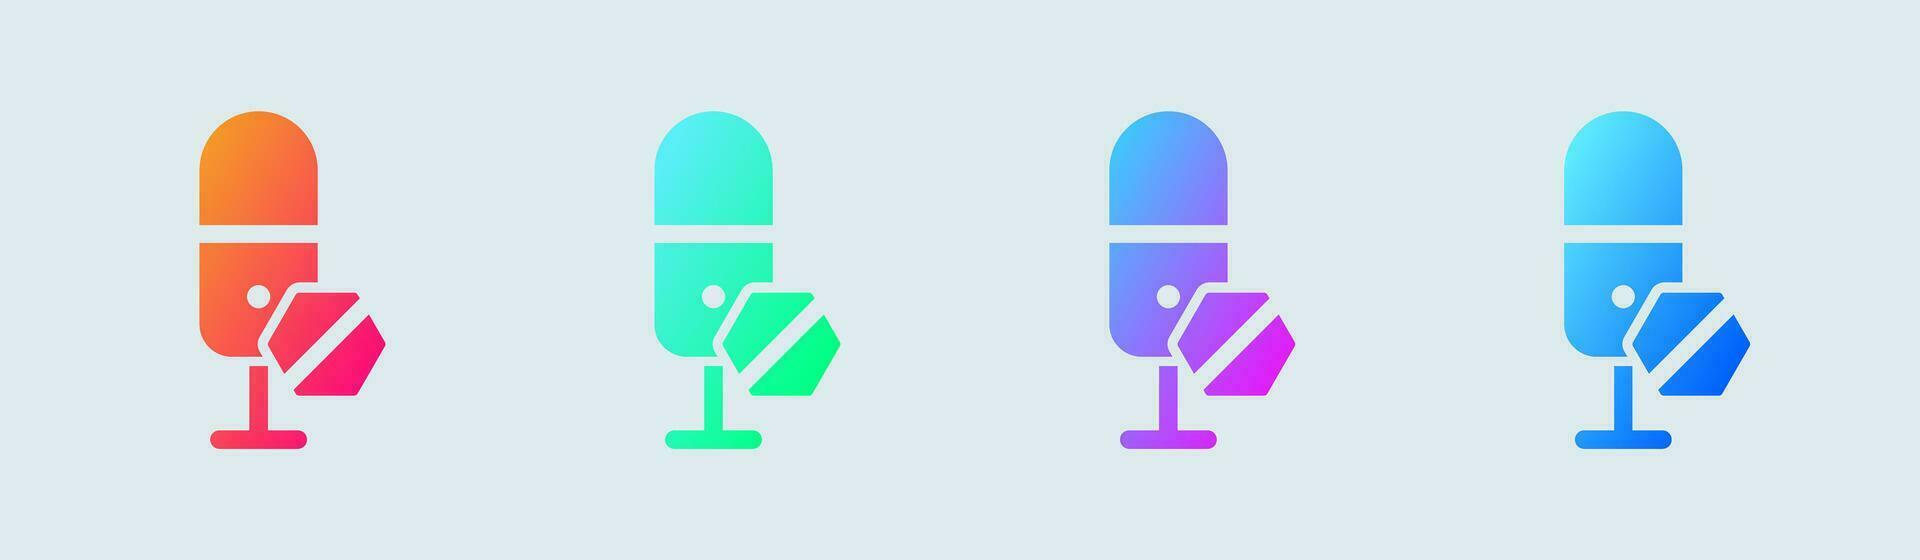 Off mic solid icon in gradient colors. Microphone signs vector illustration.